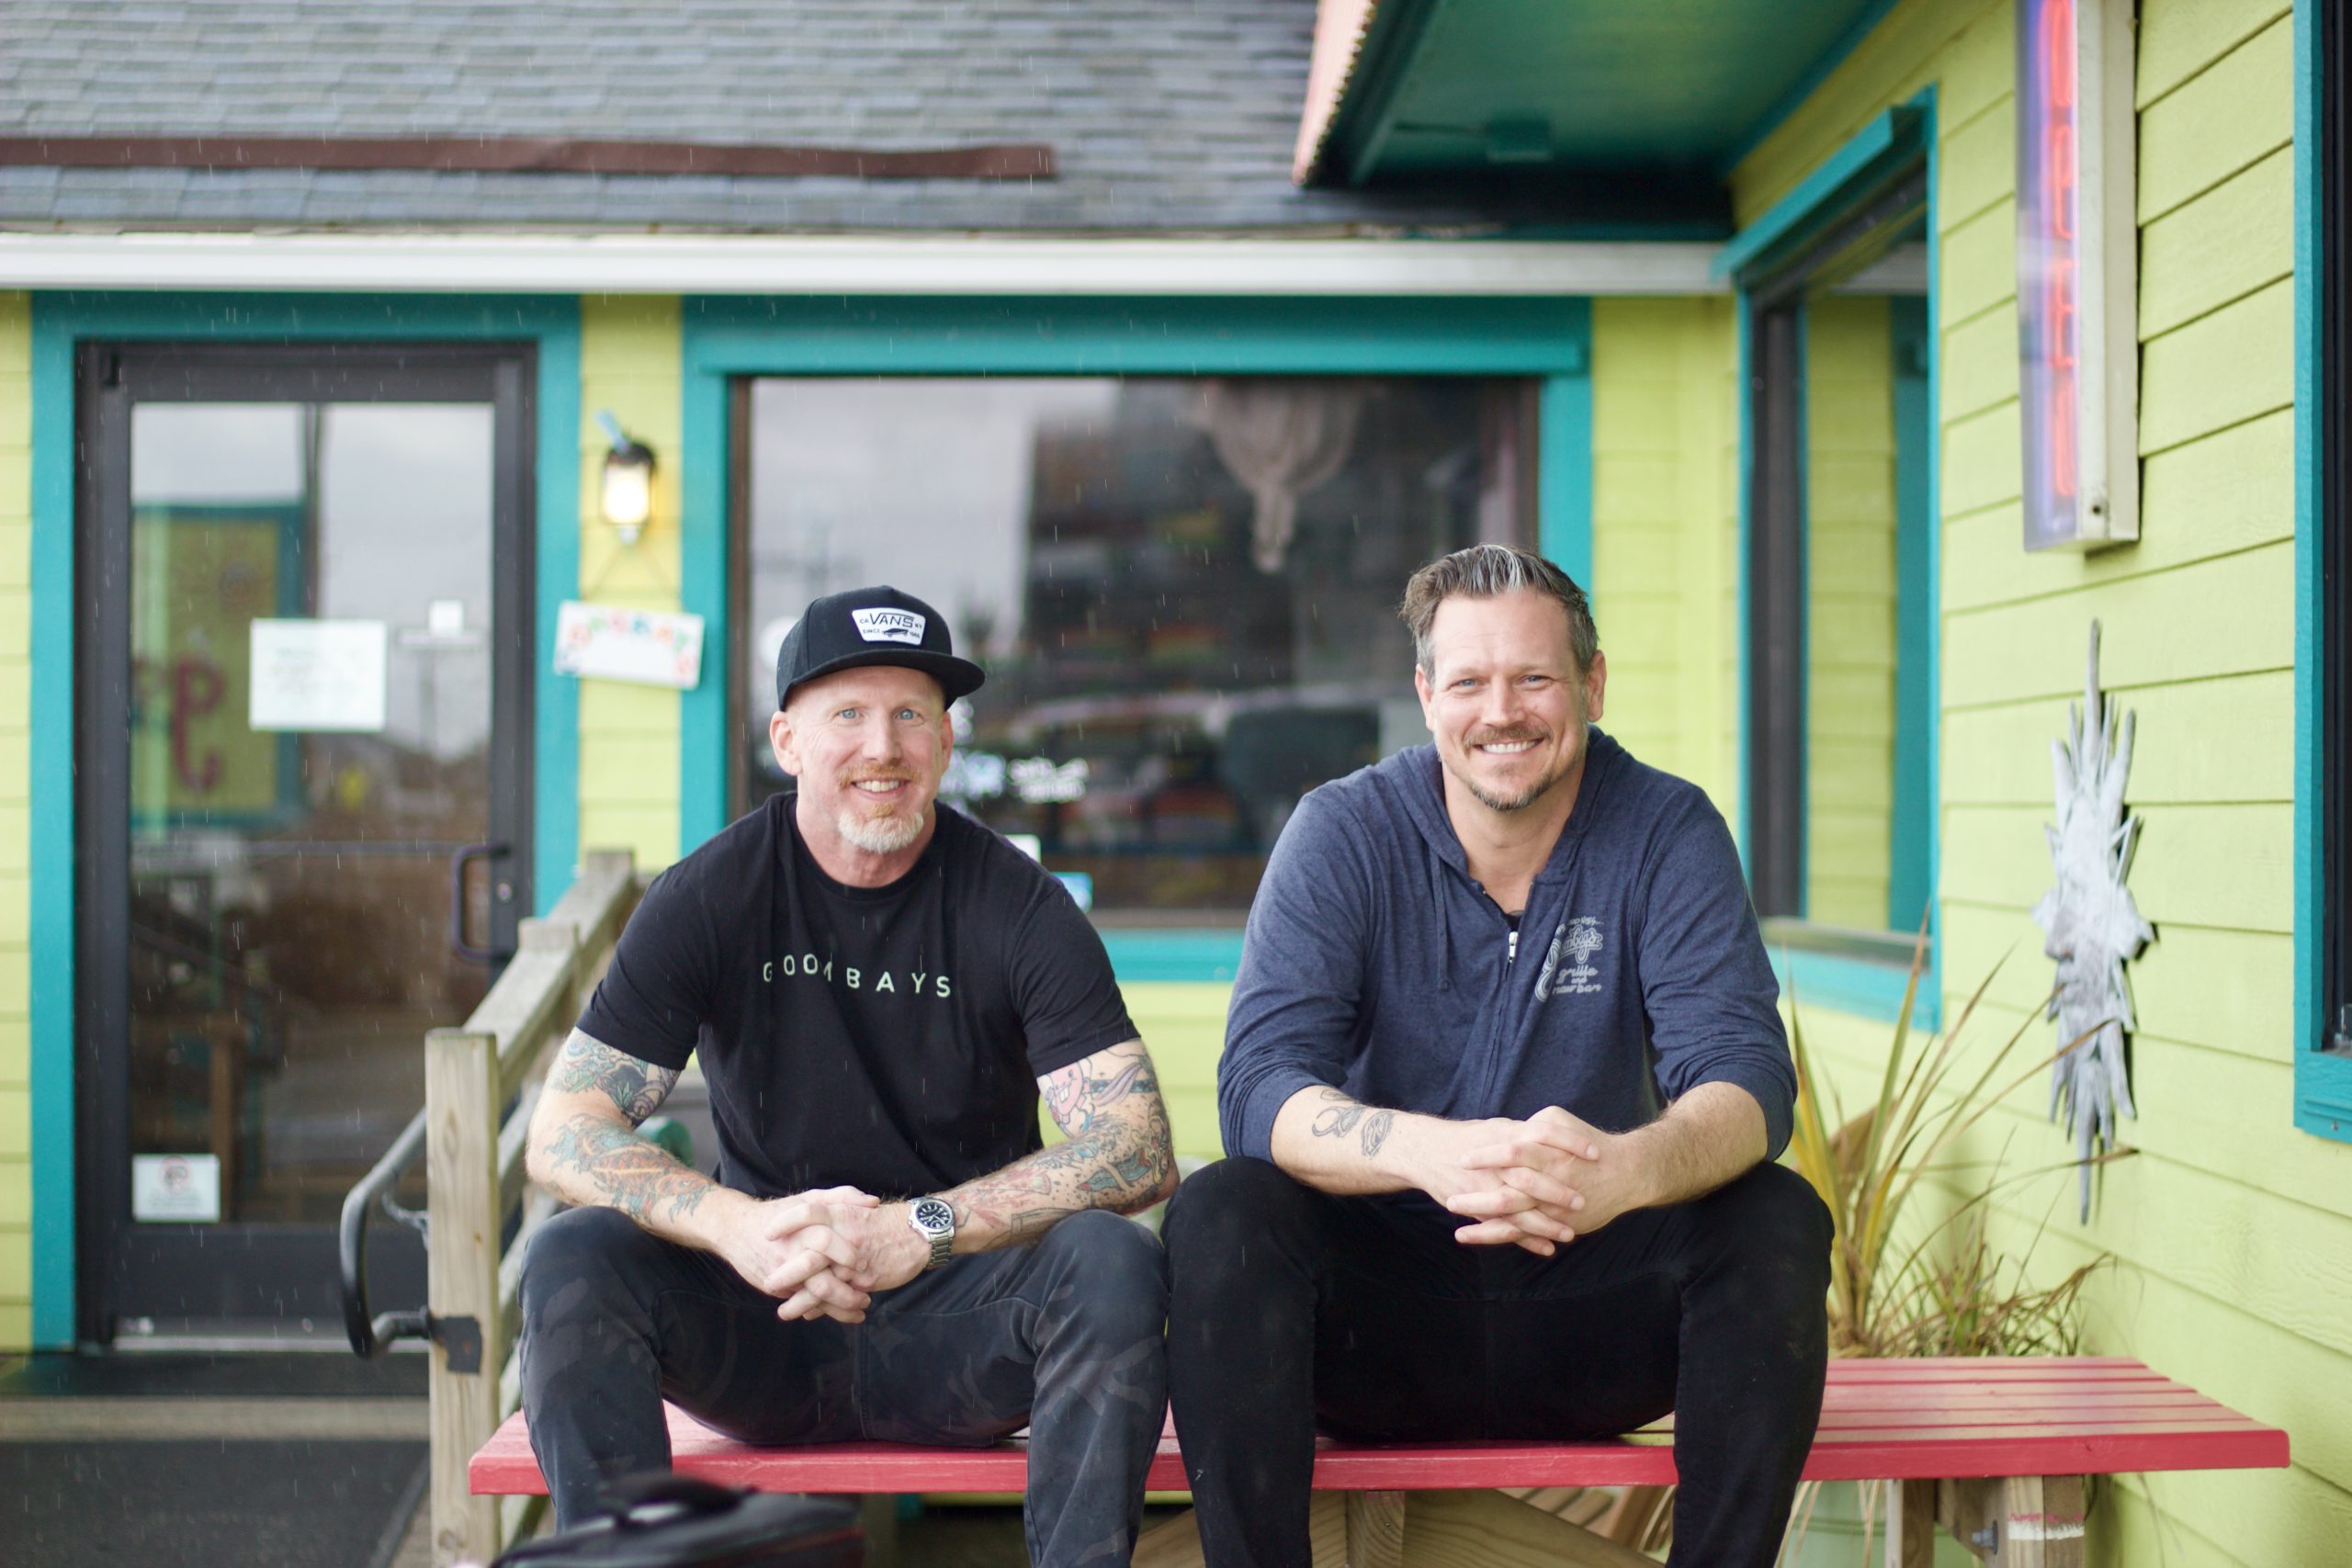 Another Outer Banks original changes hands as Goombays Grille and Raw Bar has new owners